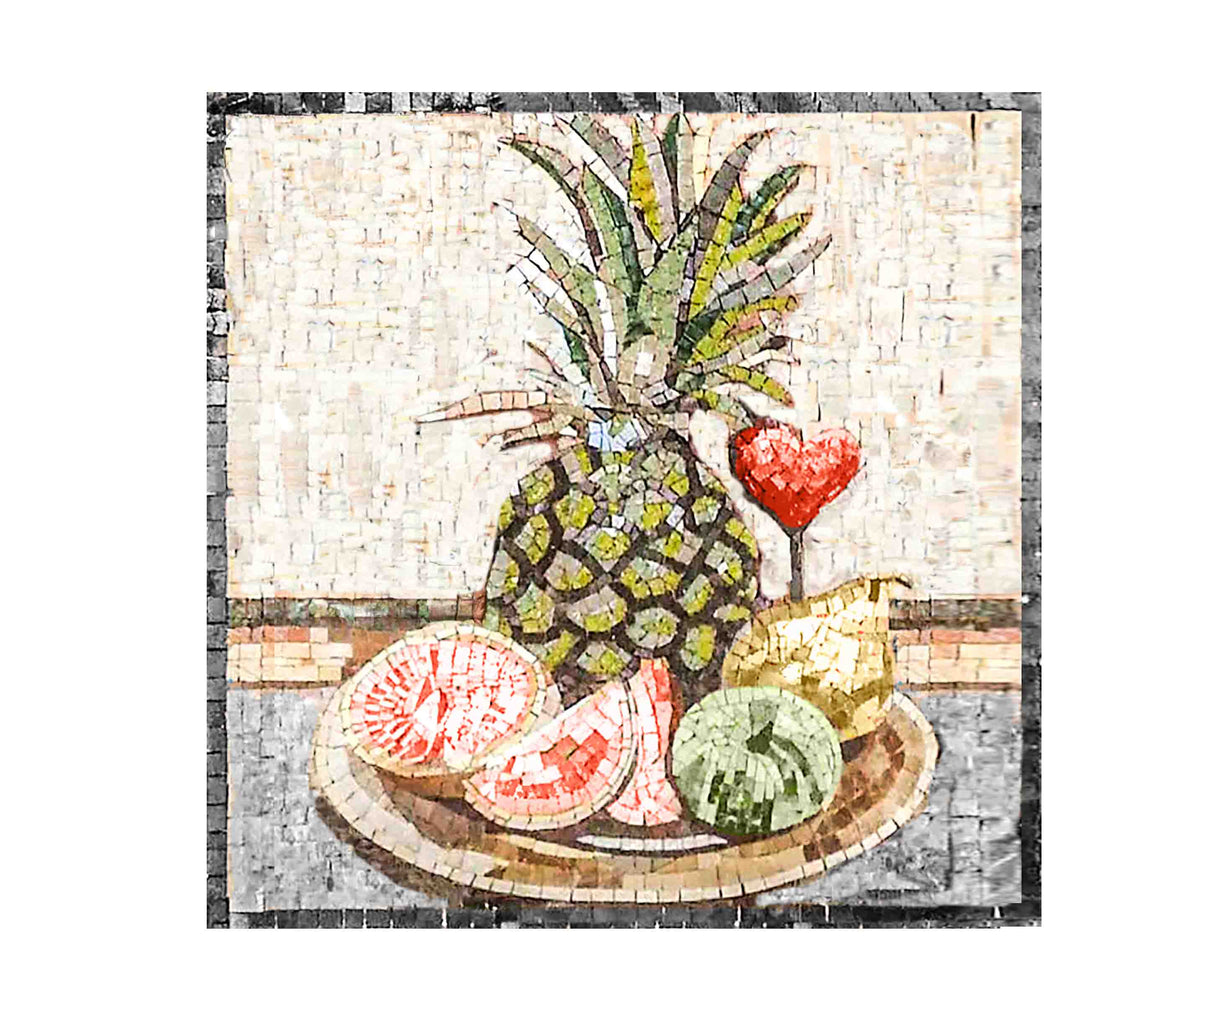 Pineapple and fruit plate with Marble Mosaic kitchen backsplash Artwork Tiles, Customizable for colors and sizes.